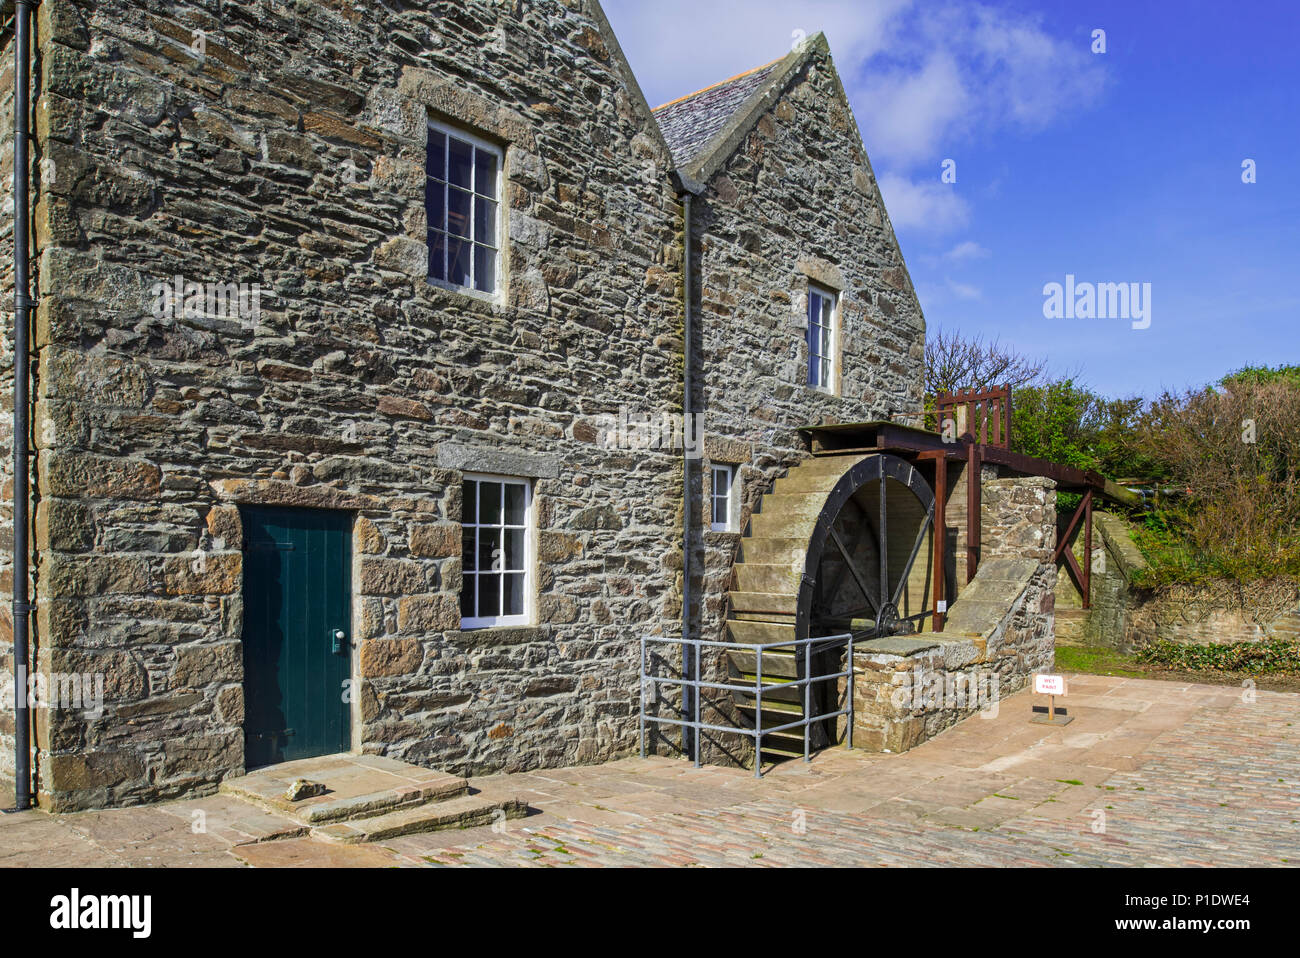 Quendale Mill, restored 19th century overshot watermill / water mill at Dunrossness, Shetland Islands, Scotland, UK Stock Photo